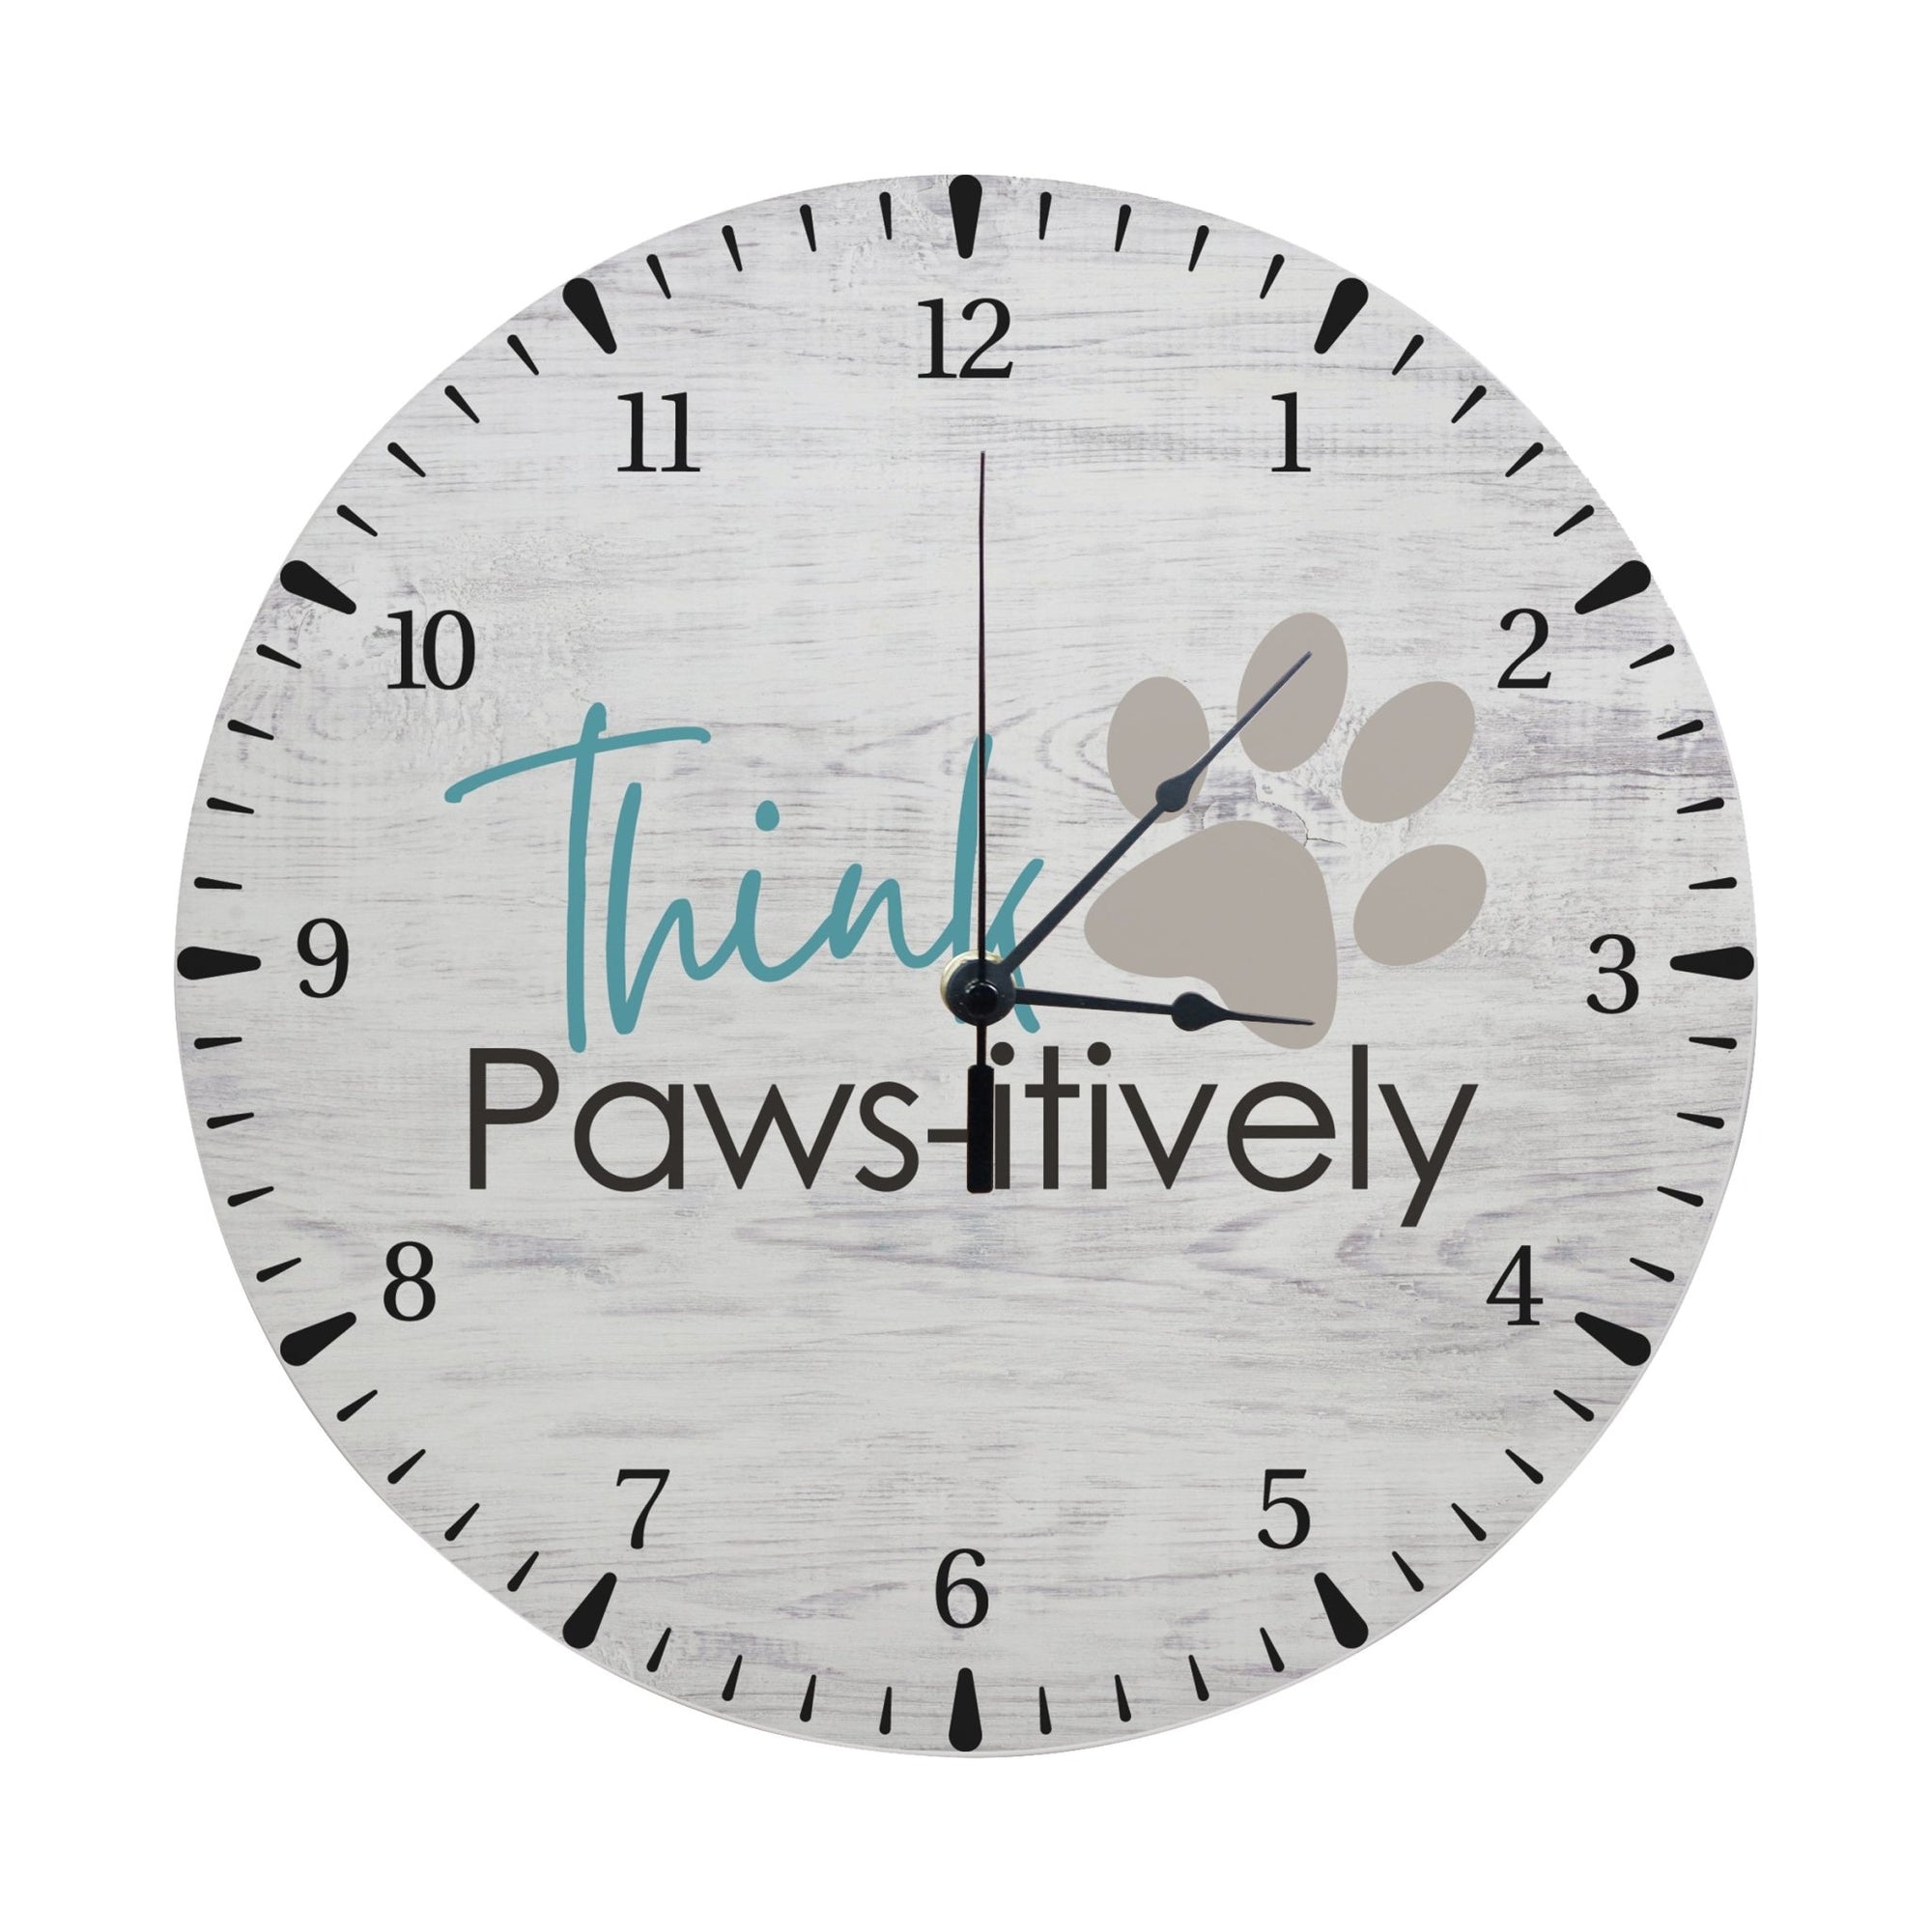 Minimalist Roman Numeral Wooden Clock For Walls Or Countertop Display For Pet Owners - This Pawsitively - LifeSong Milestones